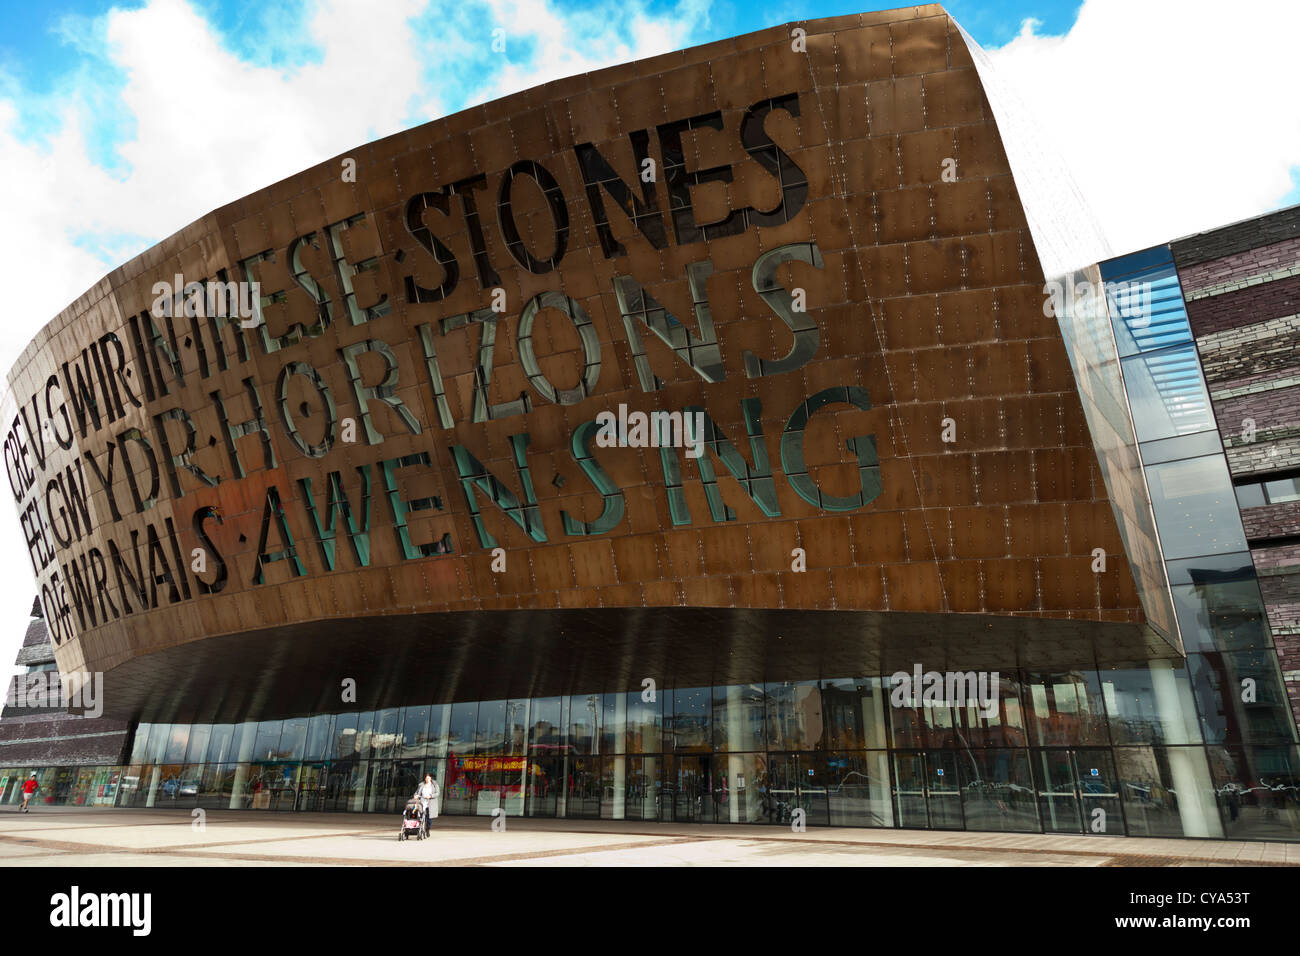 Wales Millennium centre center, Cardiff bay, Cardiff, Wales UK. Stock Photo